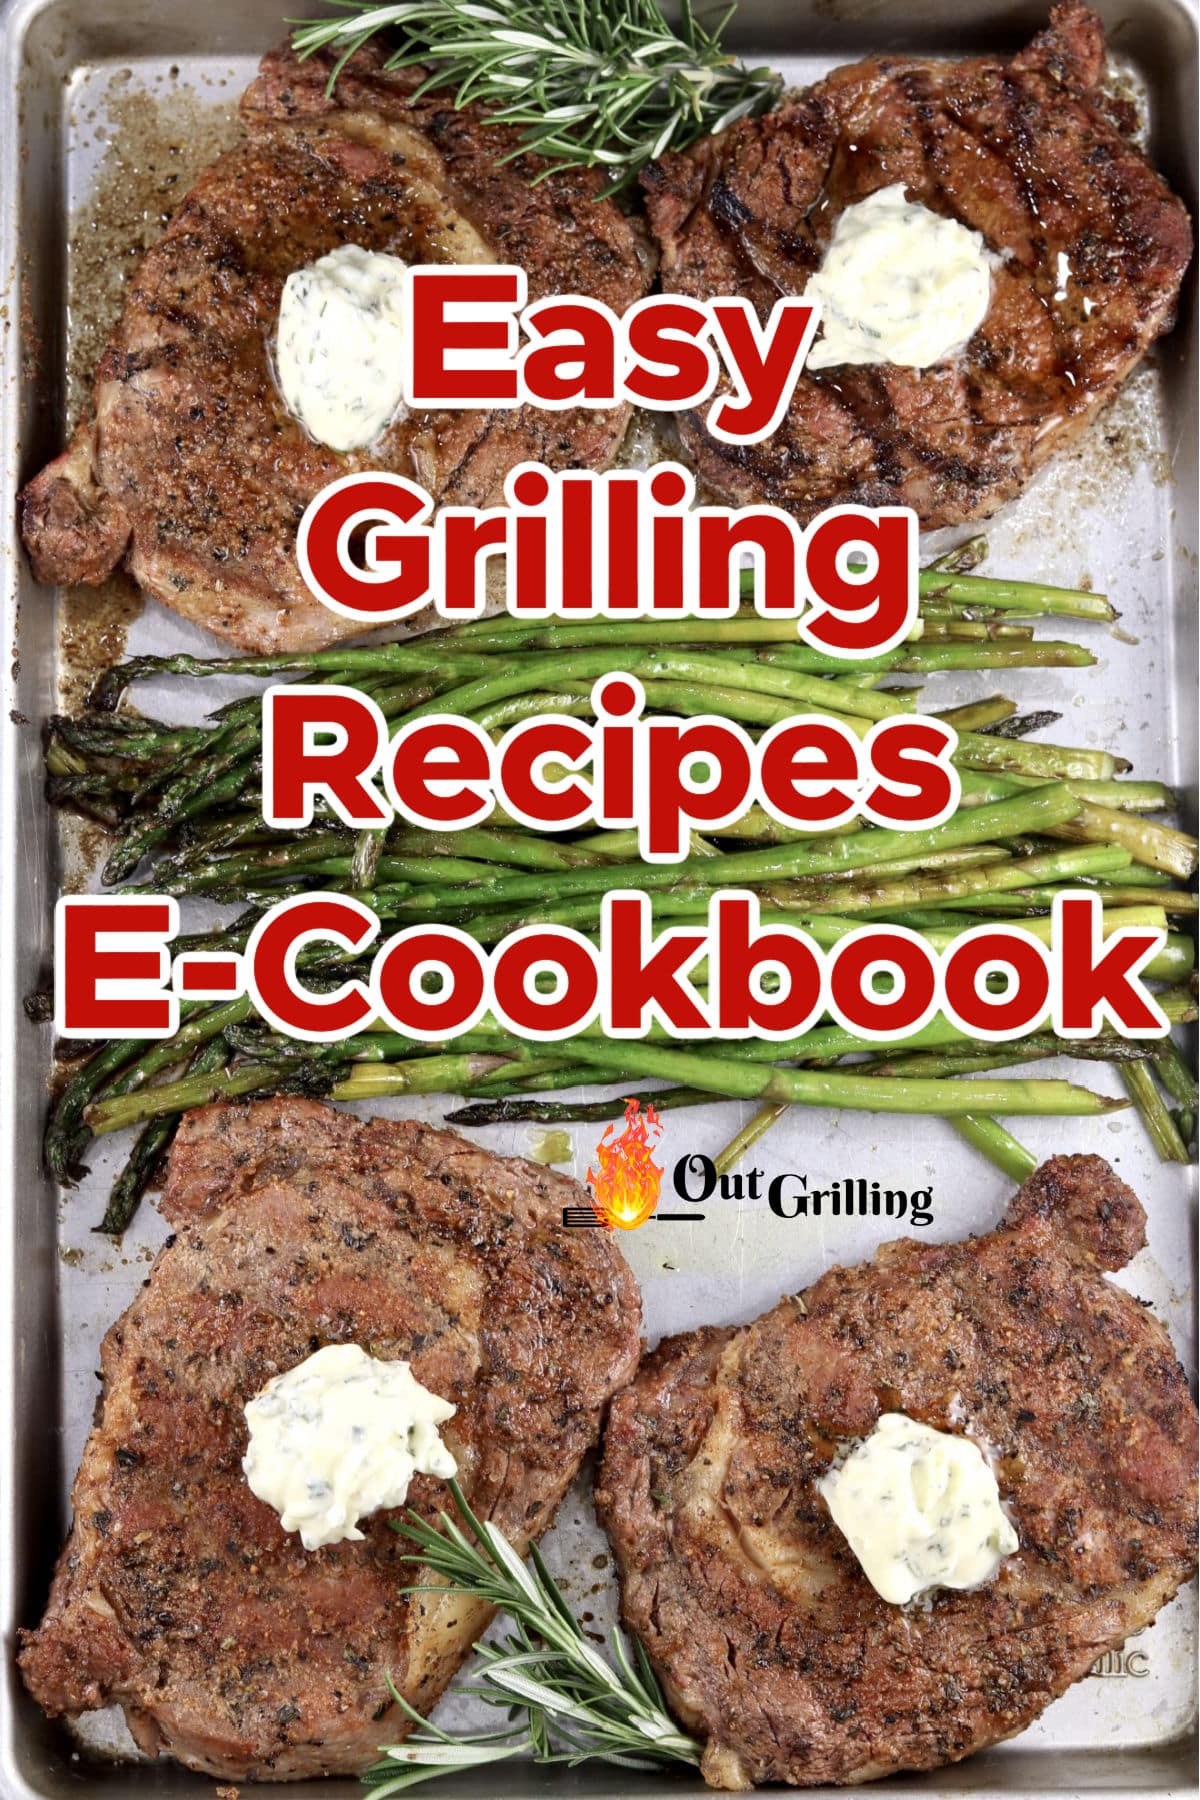 Grilled steaks cover for free ecookbook OutGrilling.com.